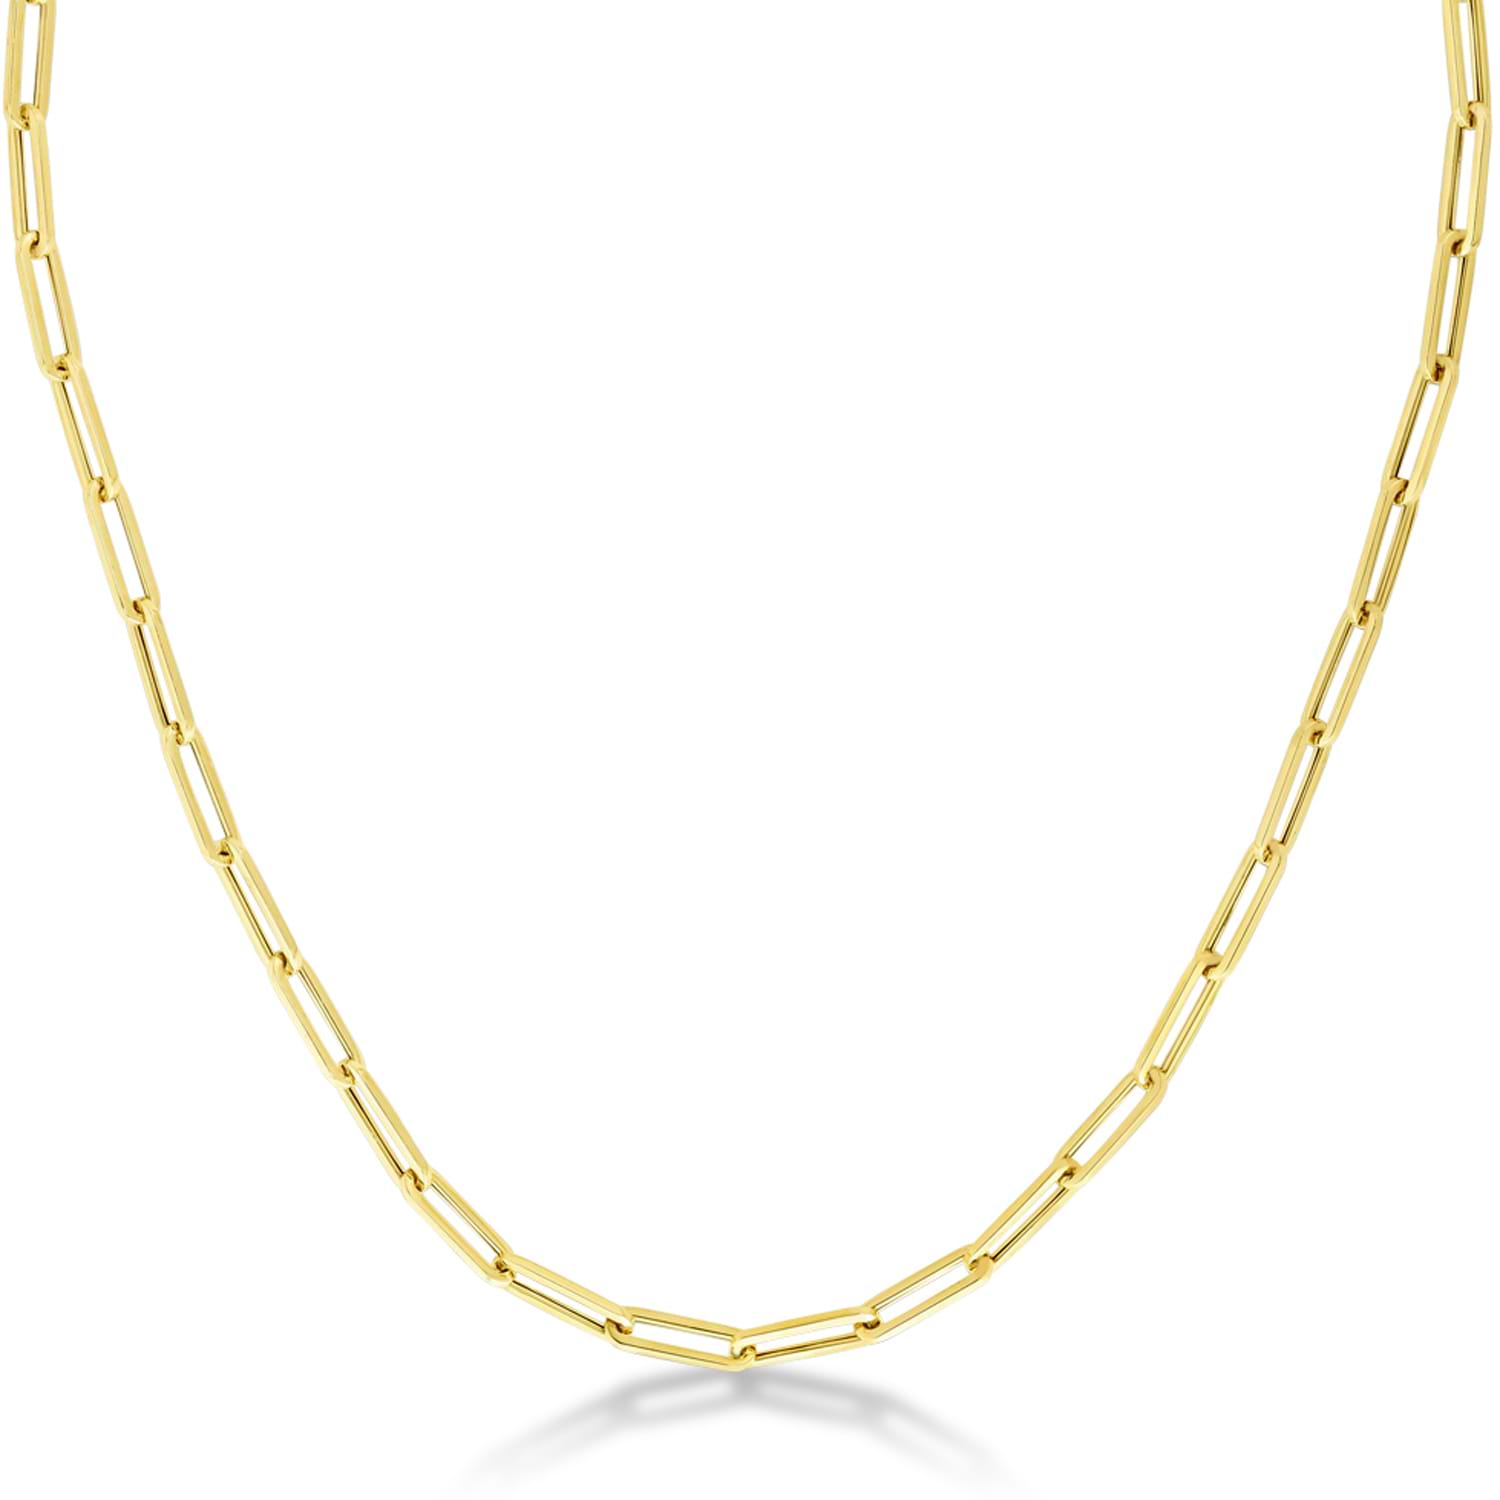 Medium Paperclip Link Chain Necklace 14k Yellow Gold (4.2mm)